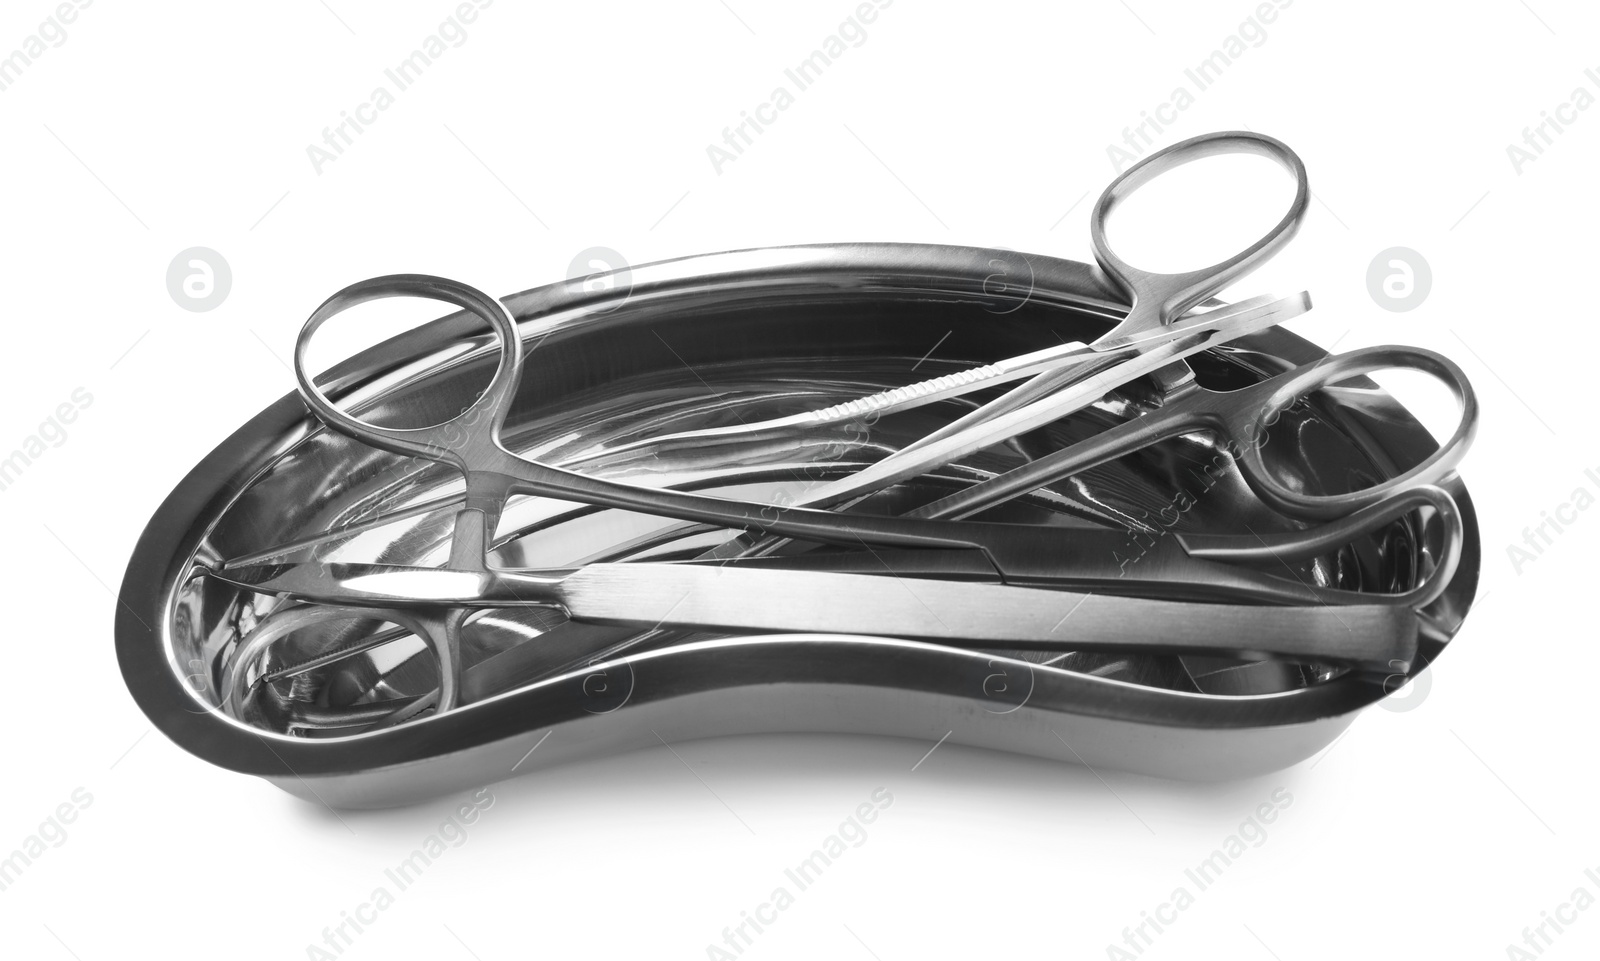 Photo of Surgical instruments in kidney dish on white background